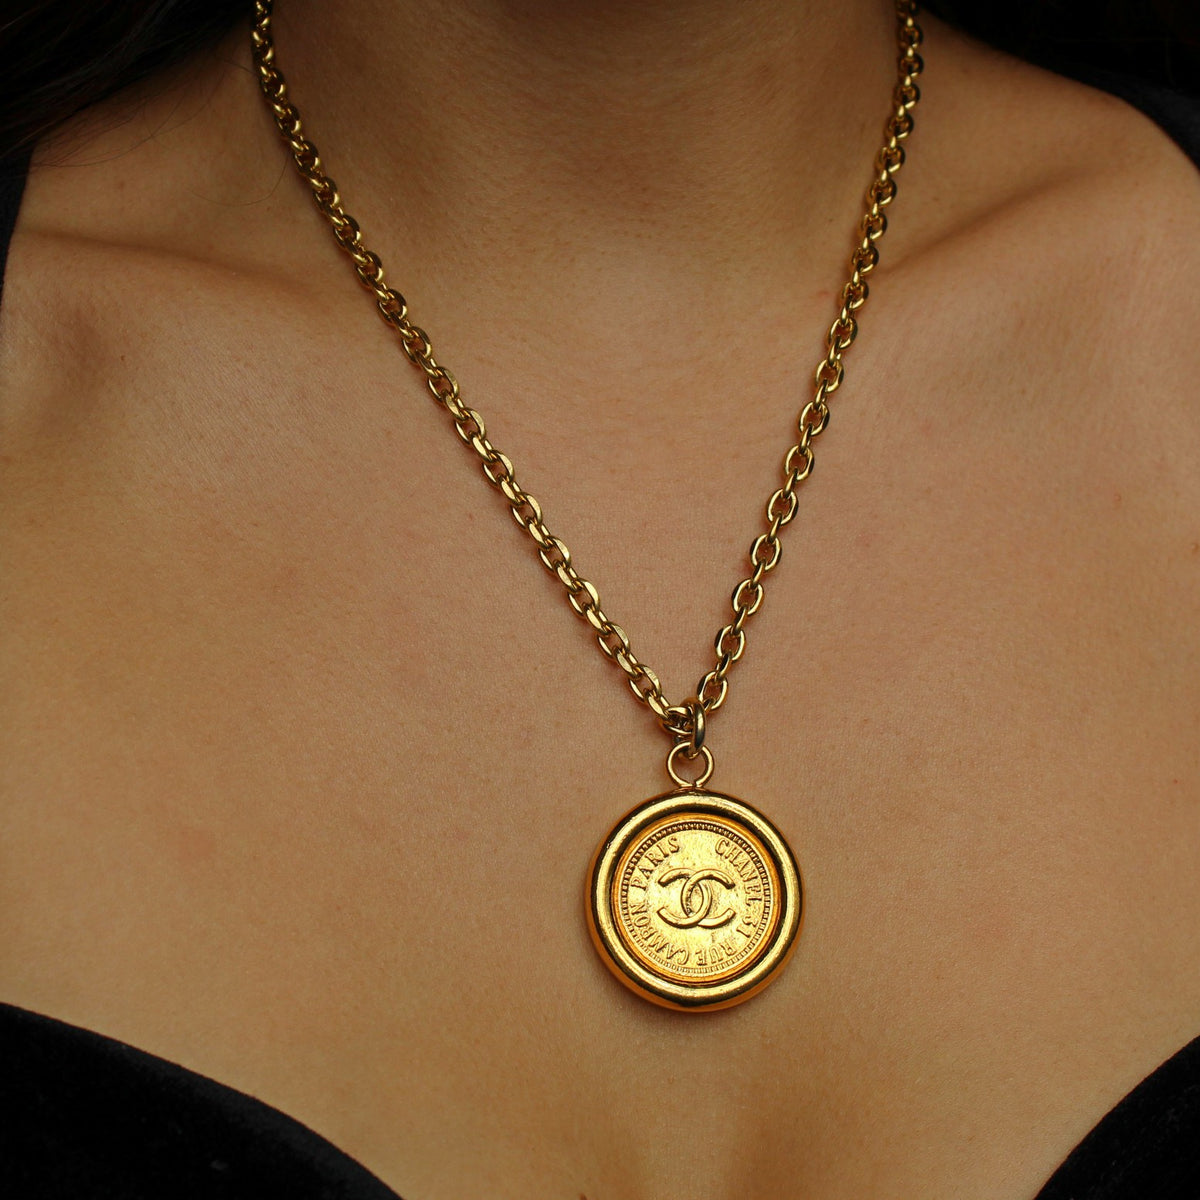 Authentic reworked Louis Vuitton small charm necklace. | VINTY TREASURES